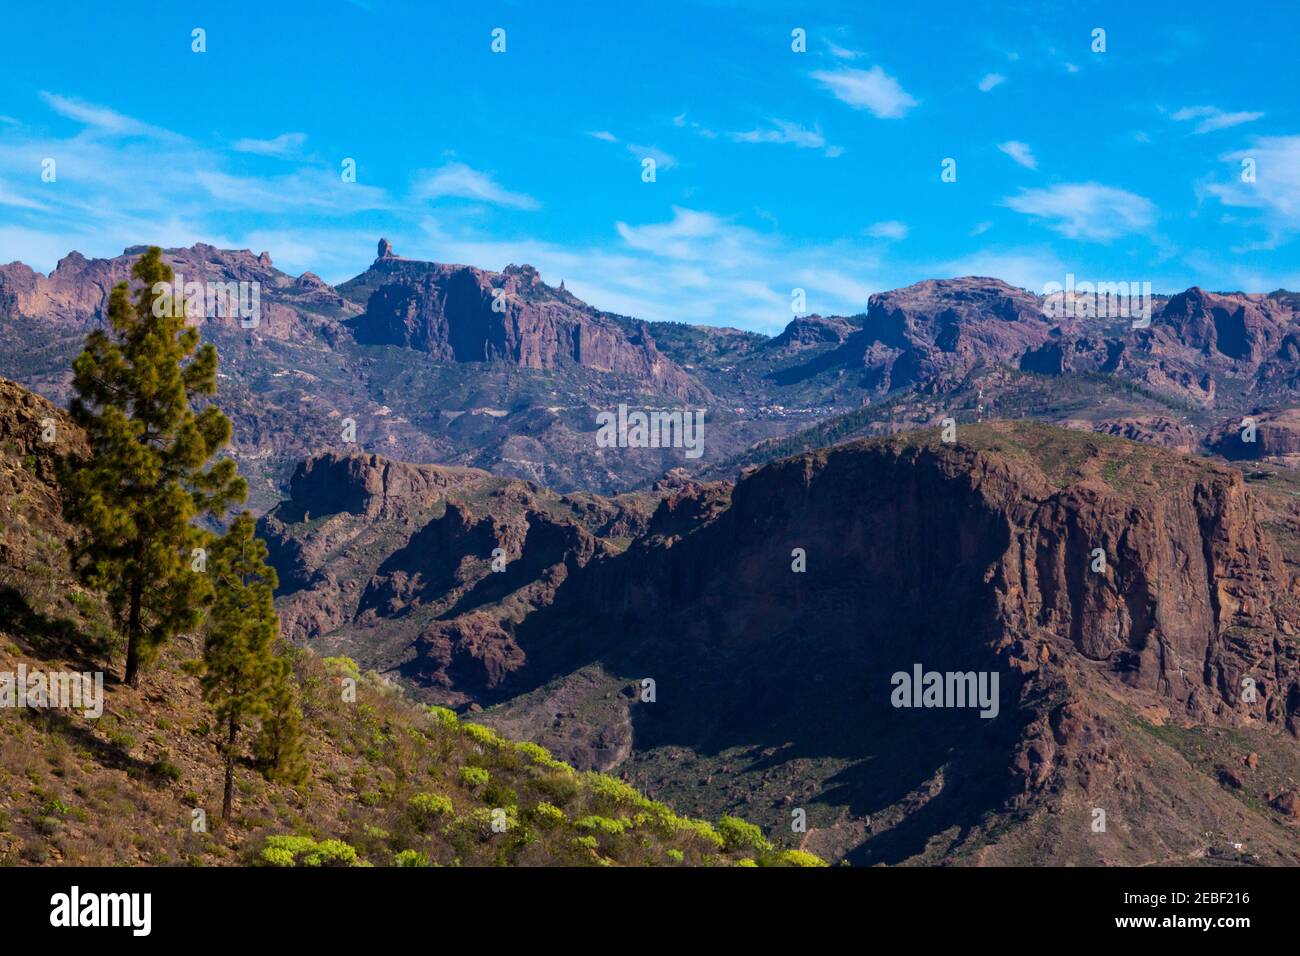 Landscape of the summit of Gran Canaria, Spain Stock Photo